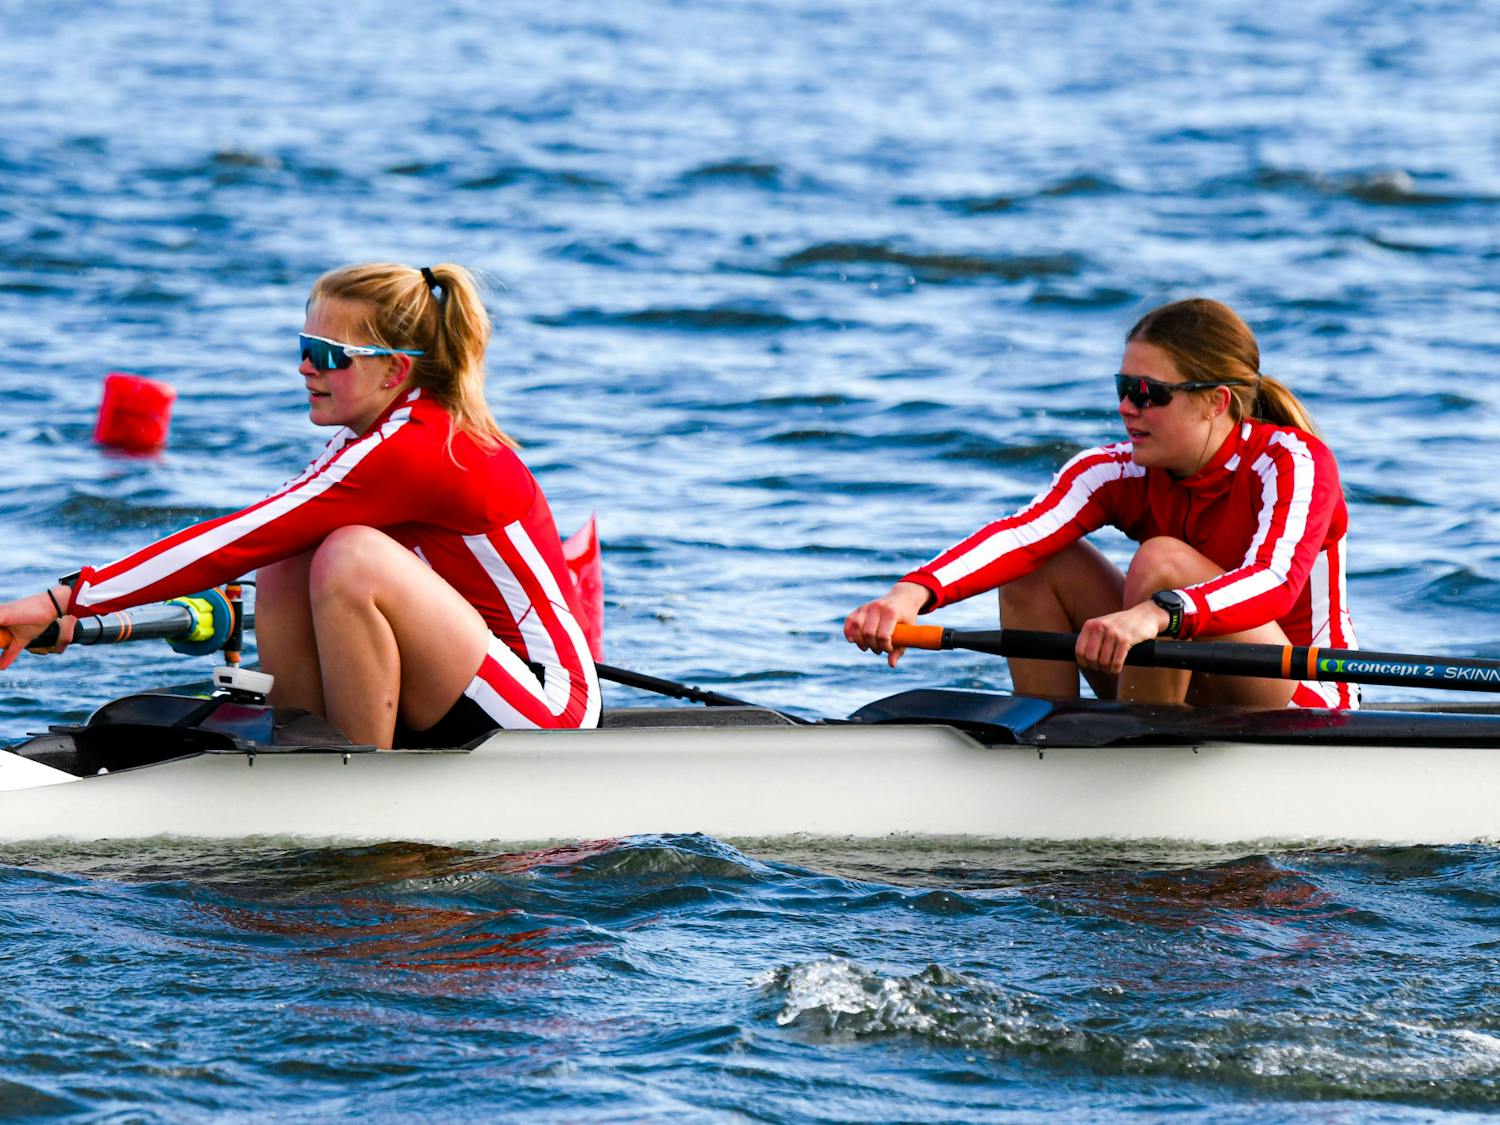 PHOTOS: Wisconsin Women's Lightweight Rowing does everything but light work in head-to-head race against Stanford